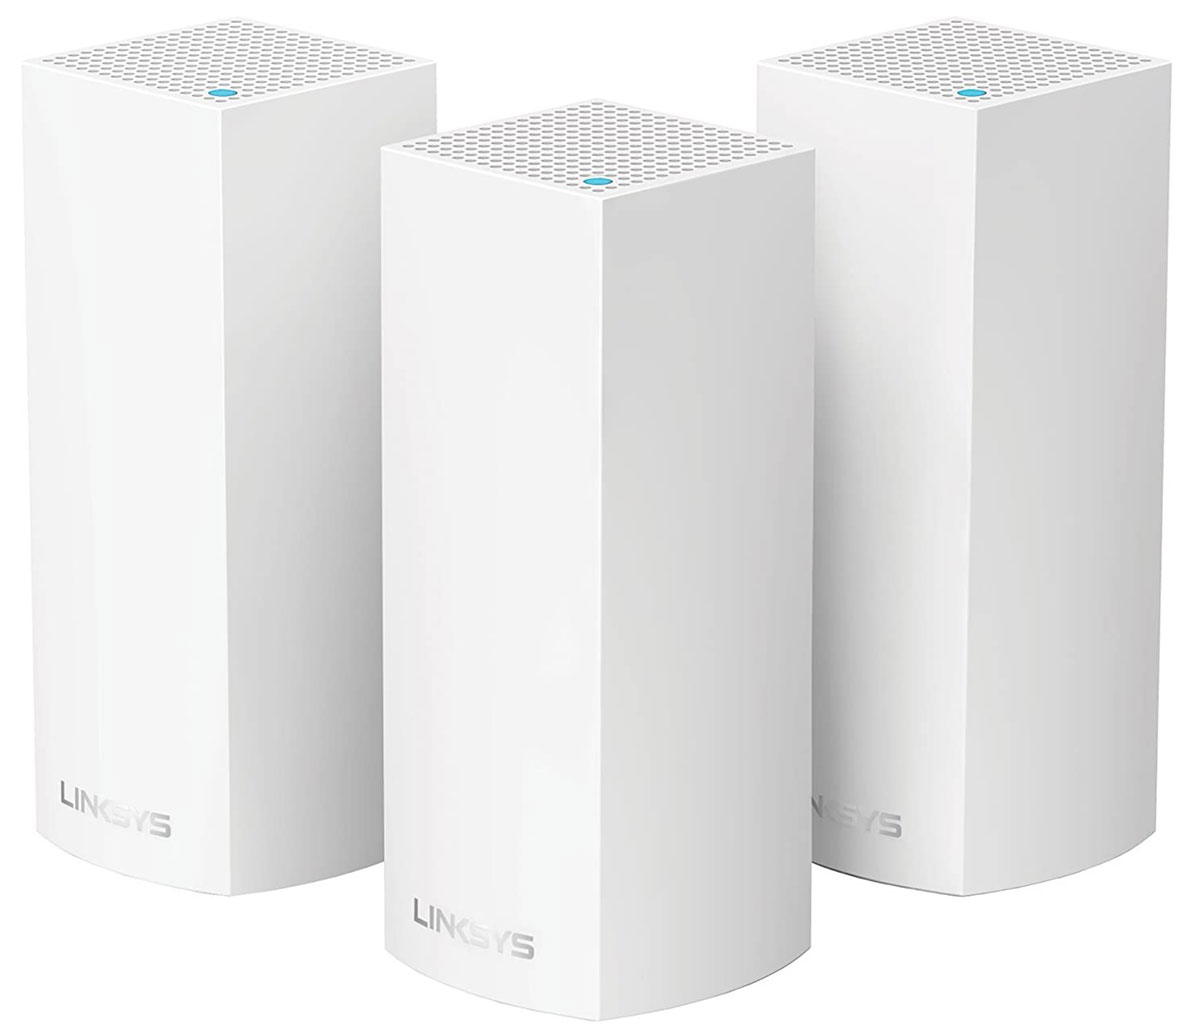 Linksys Velop Whole Home Wi-Fi (three pack) - Best mesh Wi-Fi system runner-up